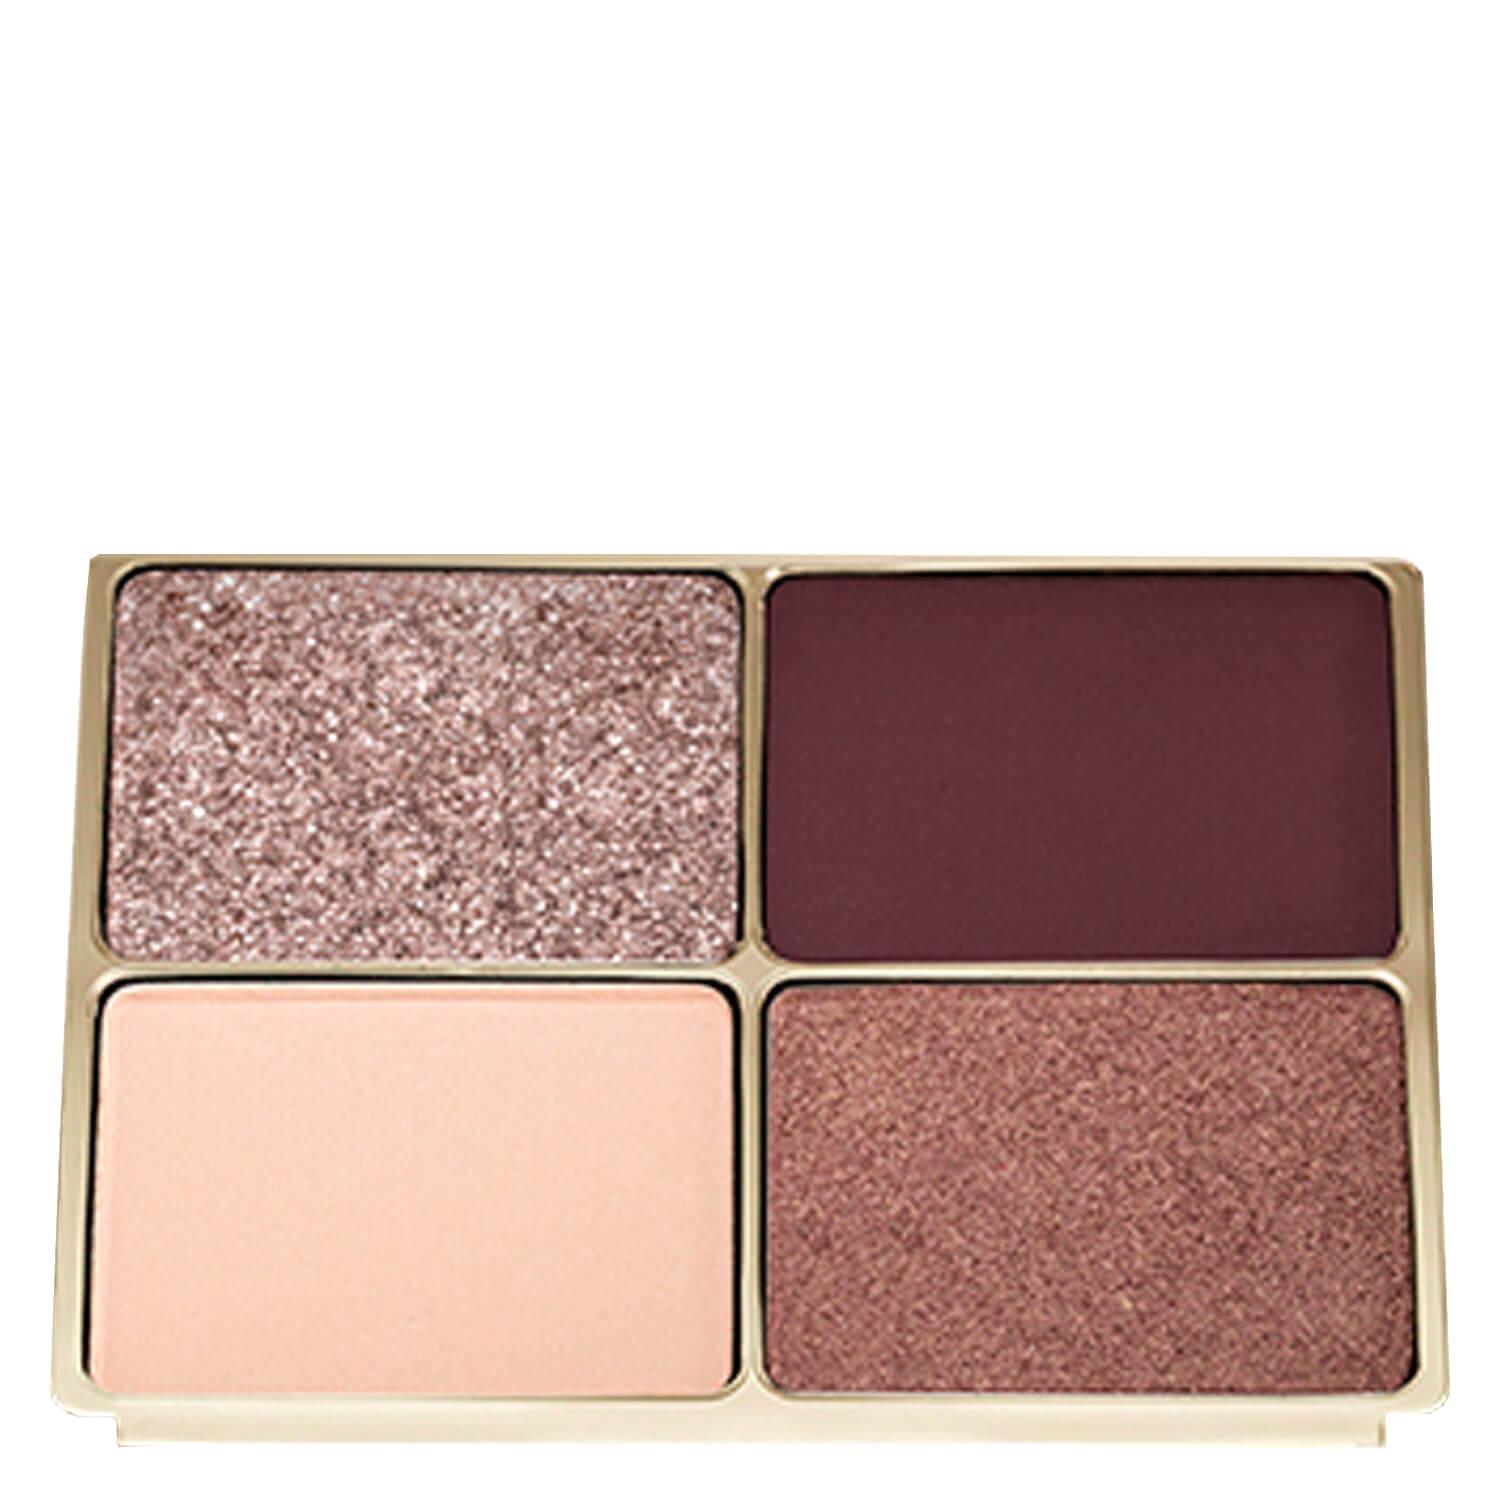 Pure Color Envy - Luxe EyeShadow Quad Aubergine Dream 03 Refill